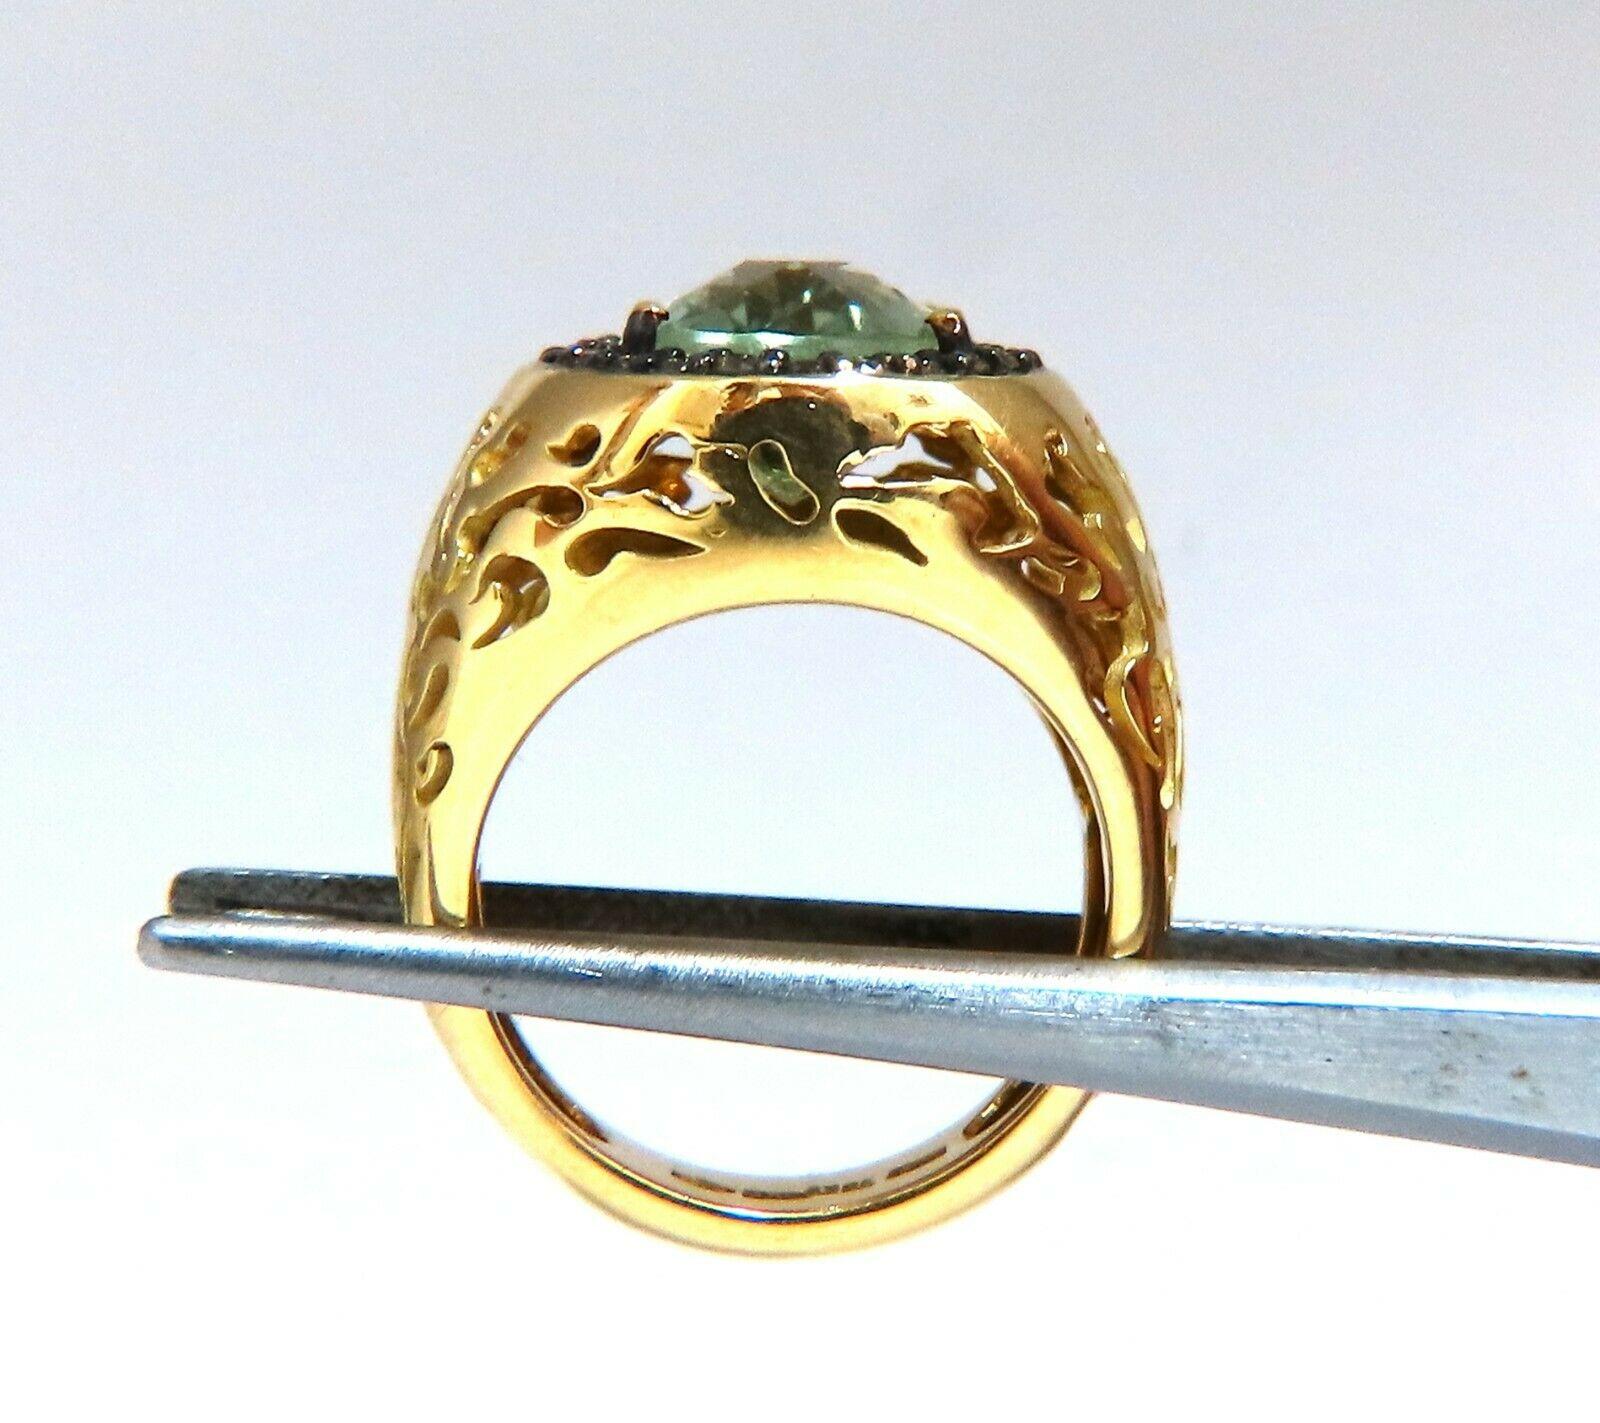 Designer Garavelli Italian

Natural oval green amethyst ring.

16 carat round brilliant cut.

Clean clarity and transparent.

Classic Teal Green

Amethyst: 14.2 x 9.5mm

18 karat yellow gold.

13.5 grams total weight.

Depth of ring 9.5mm

Size 7.5